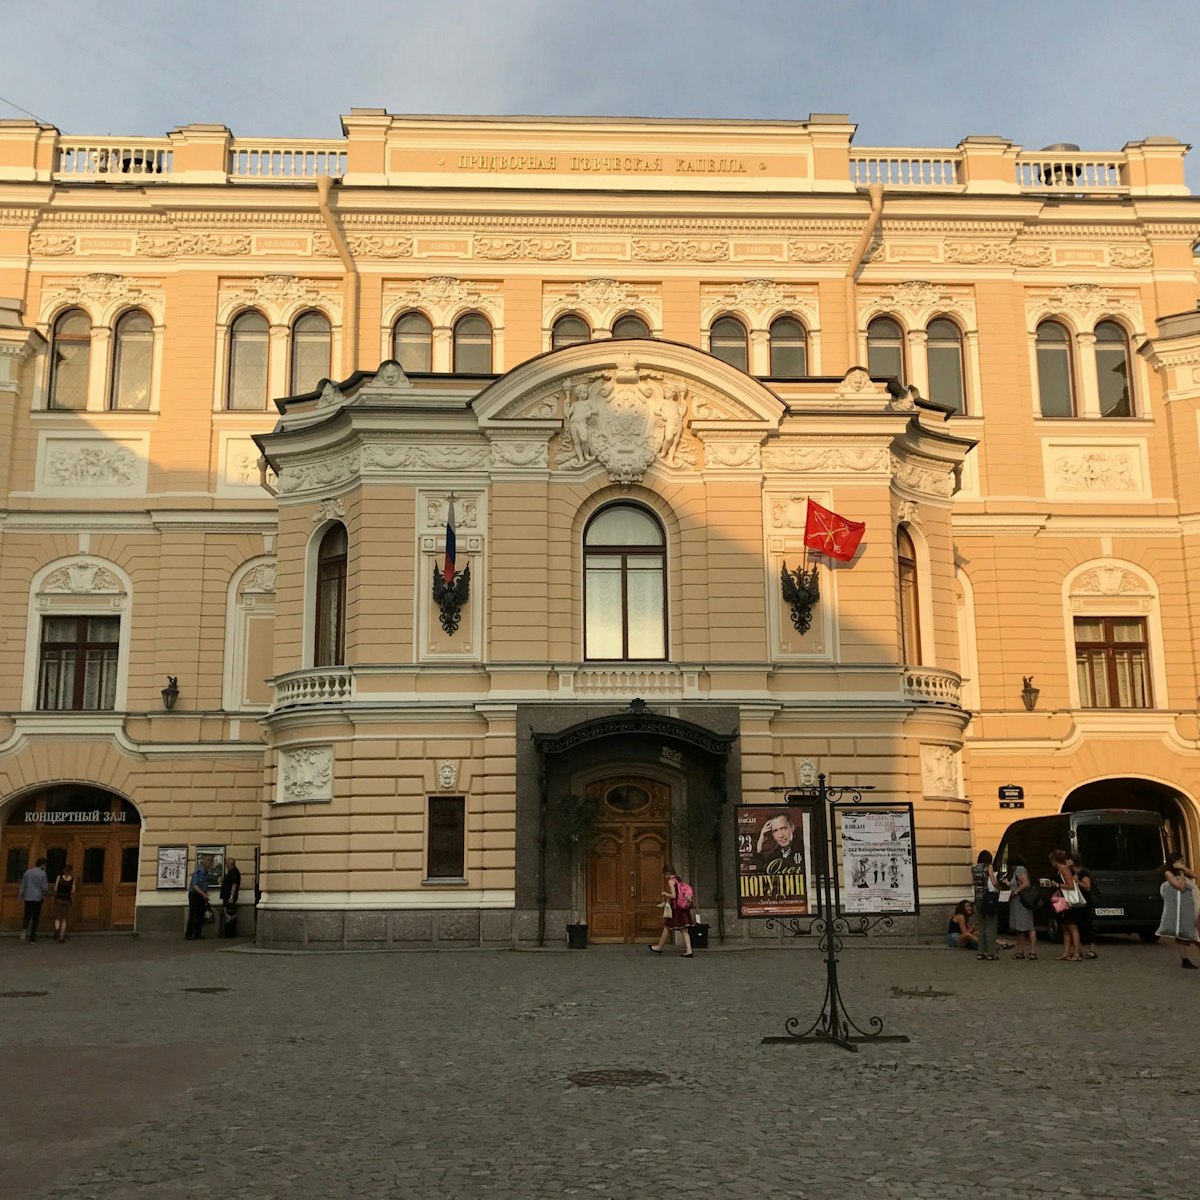 The entrance to Glinka Capella House in St Petersburg.